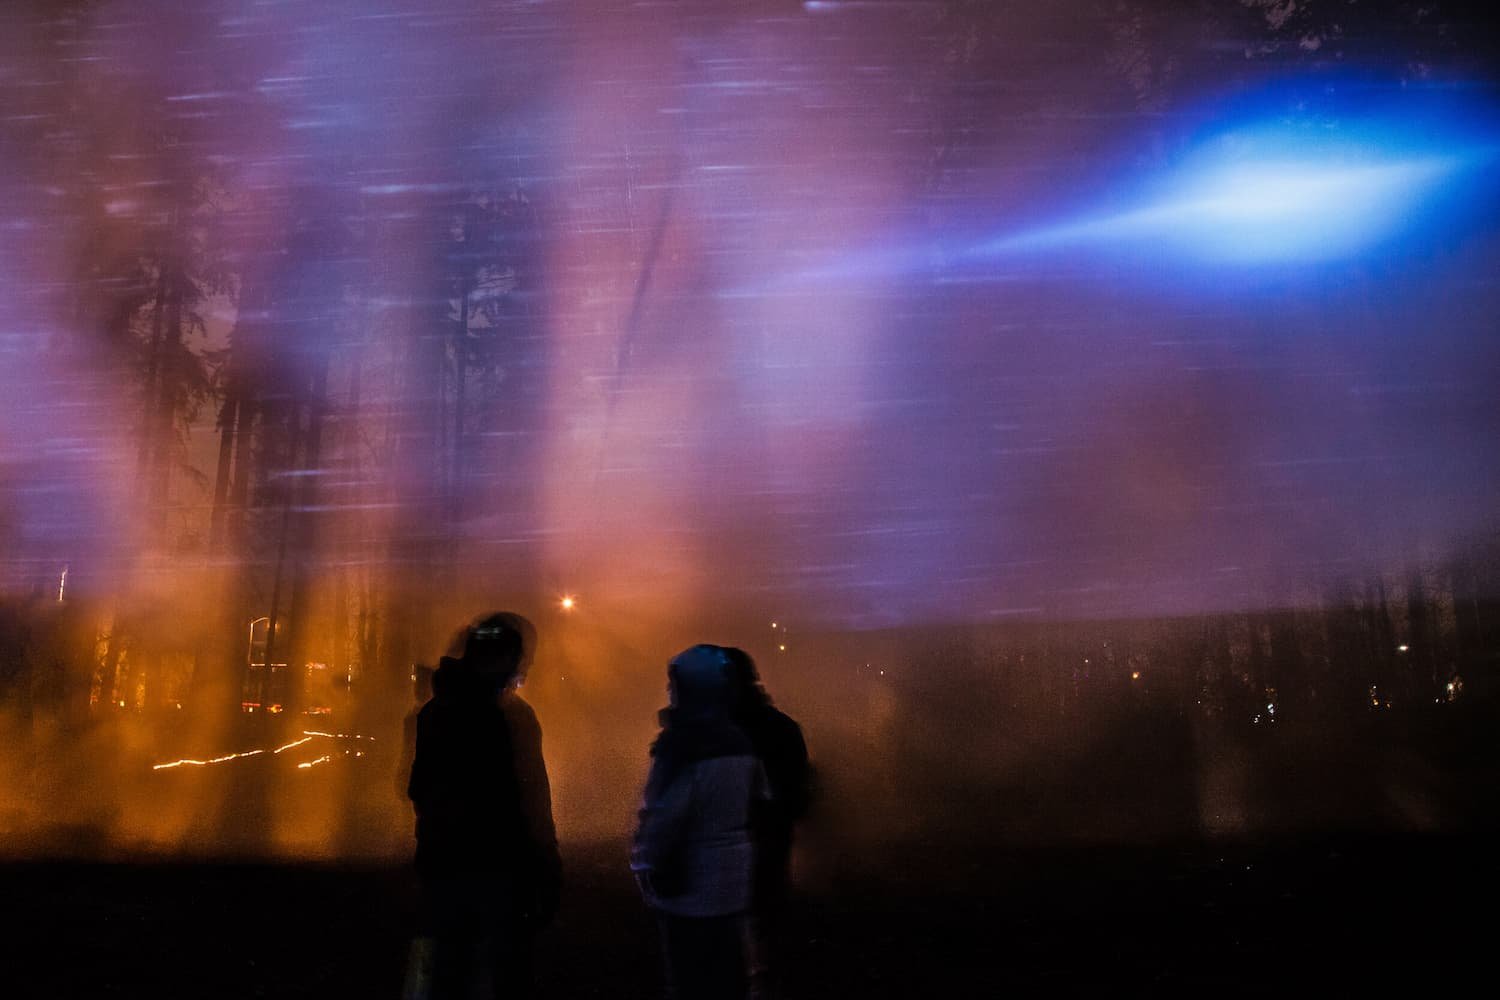 Visitors encountering an exploding blue light, representing the death of a person.